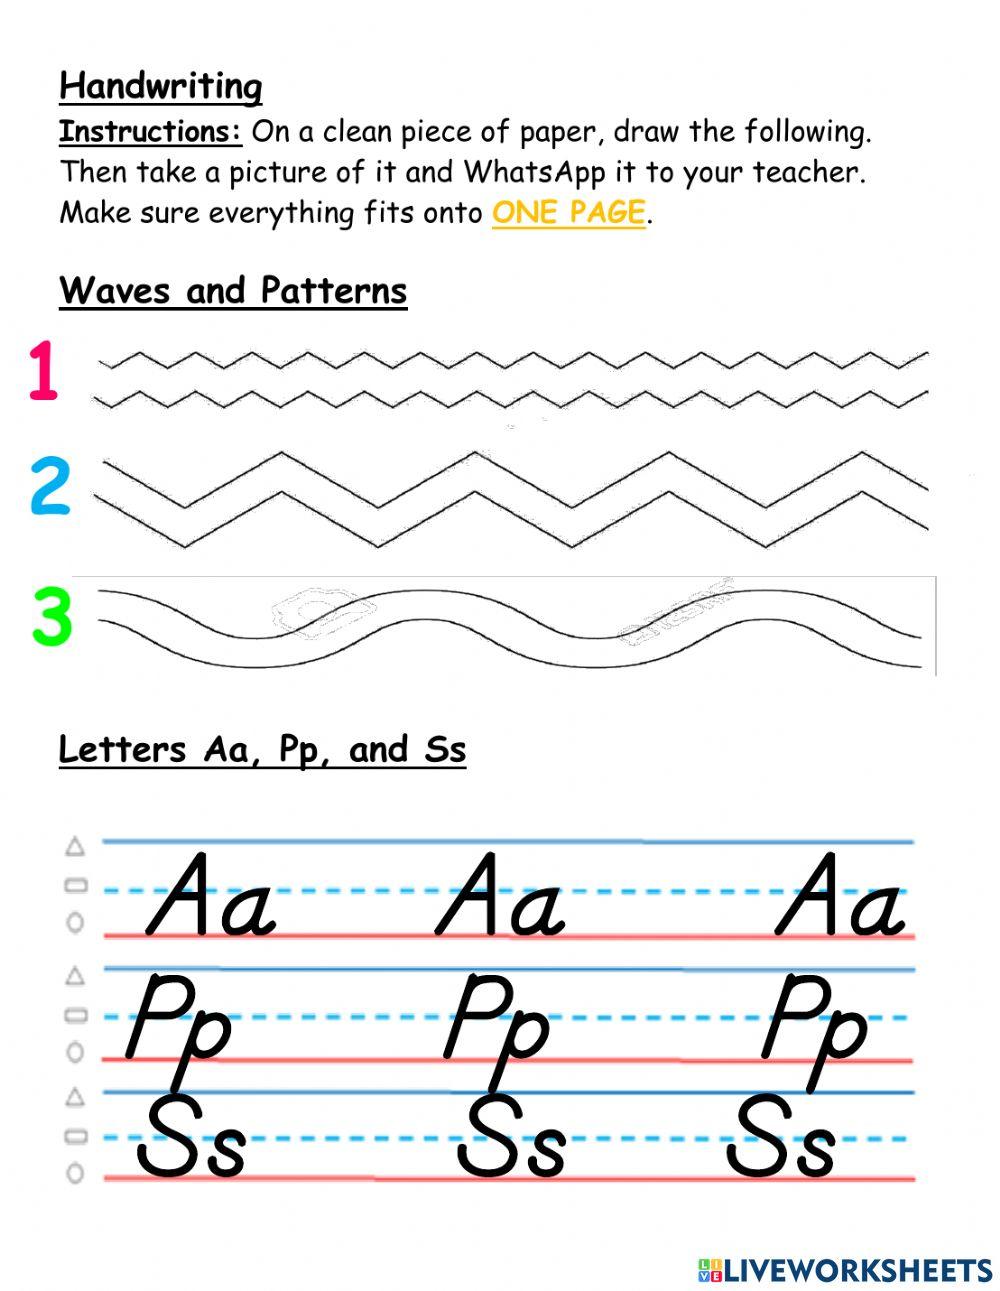 Waves and Patterns, Letters A, P and S